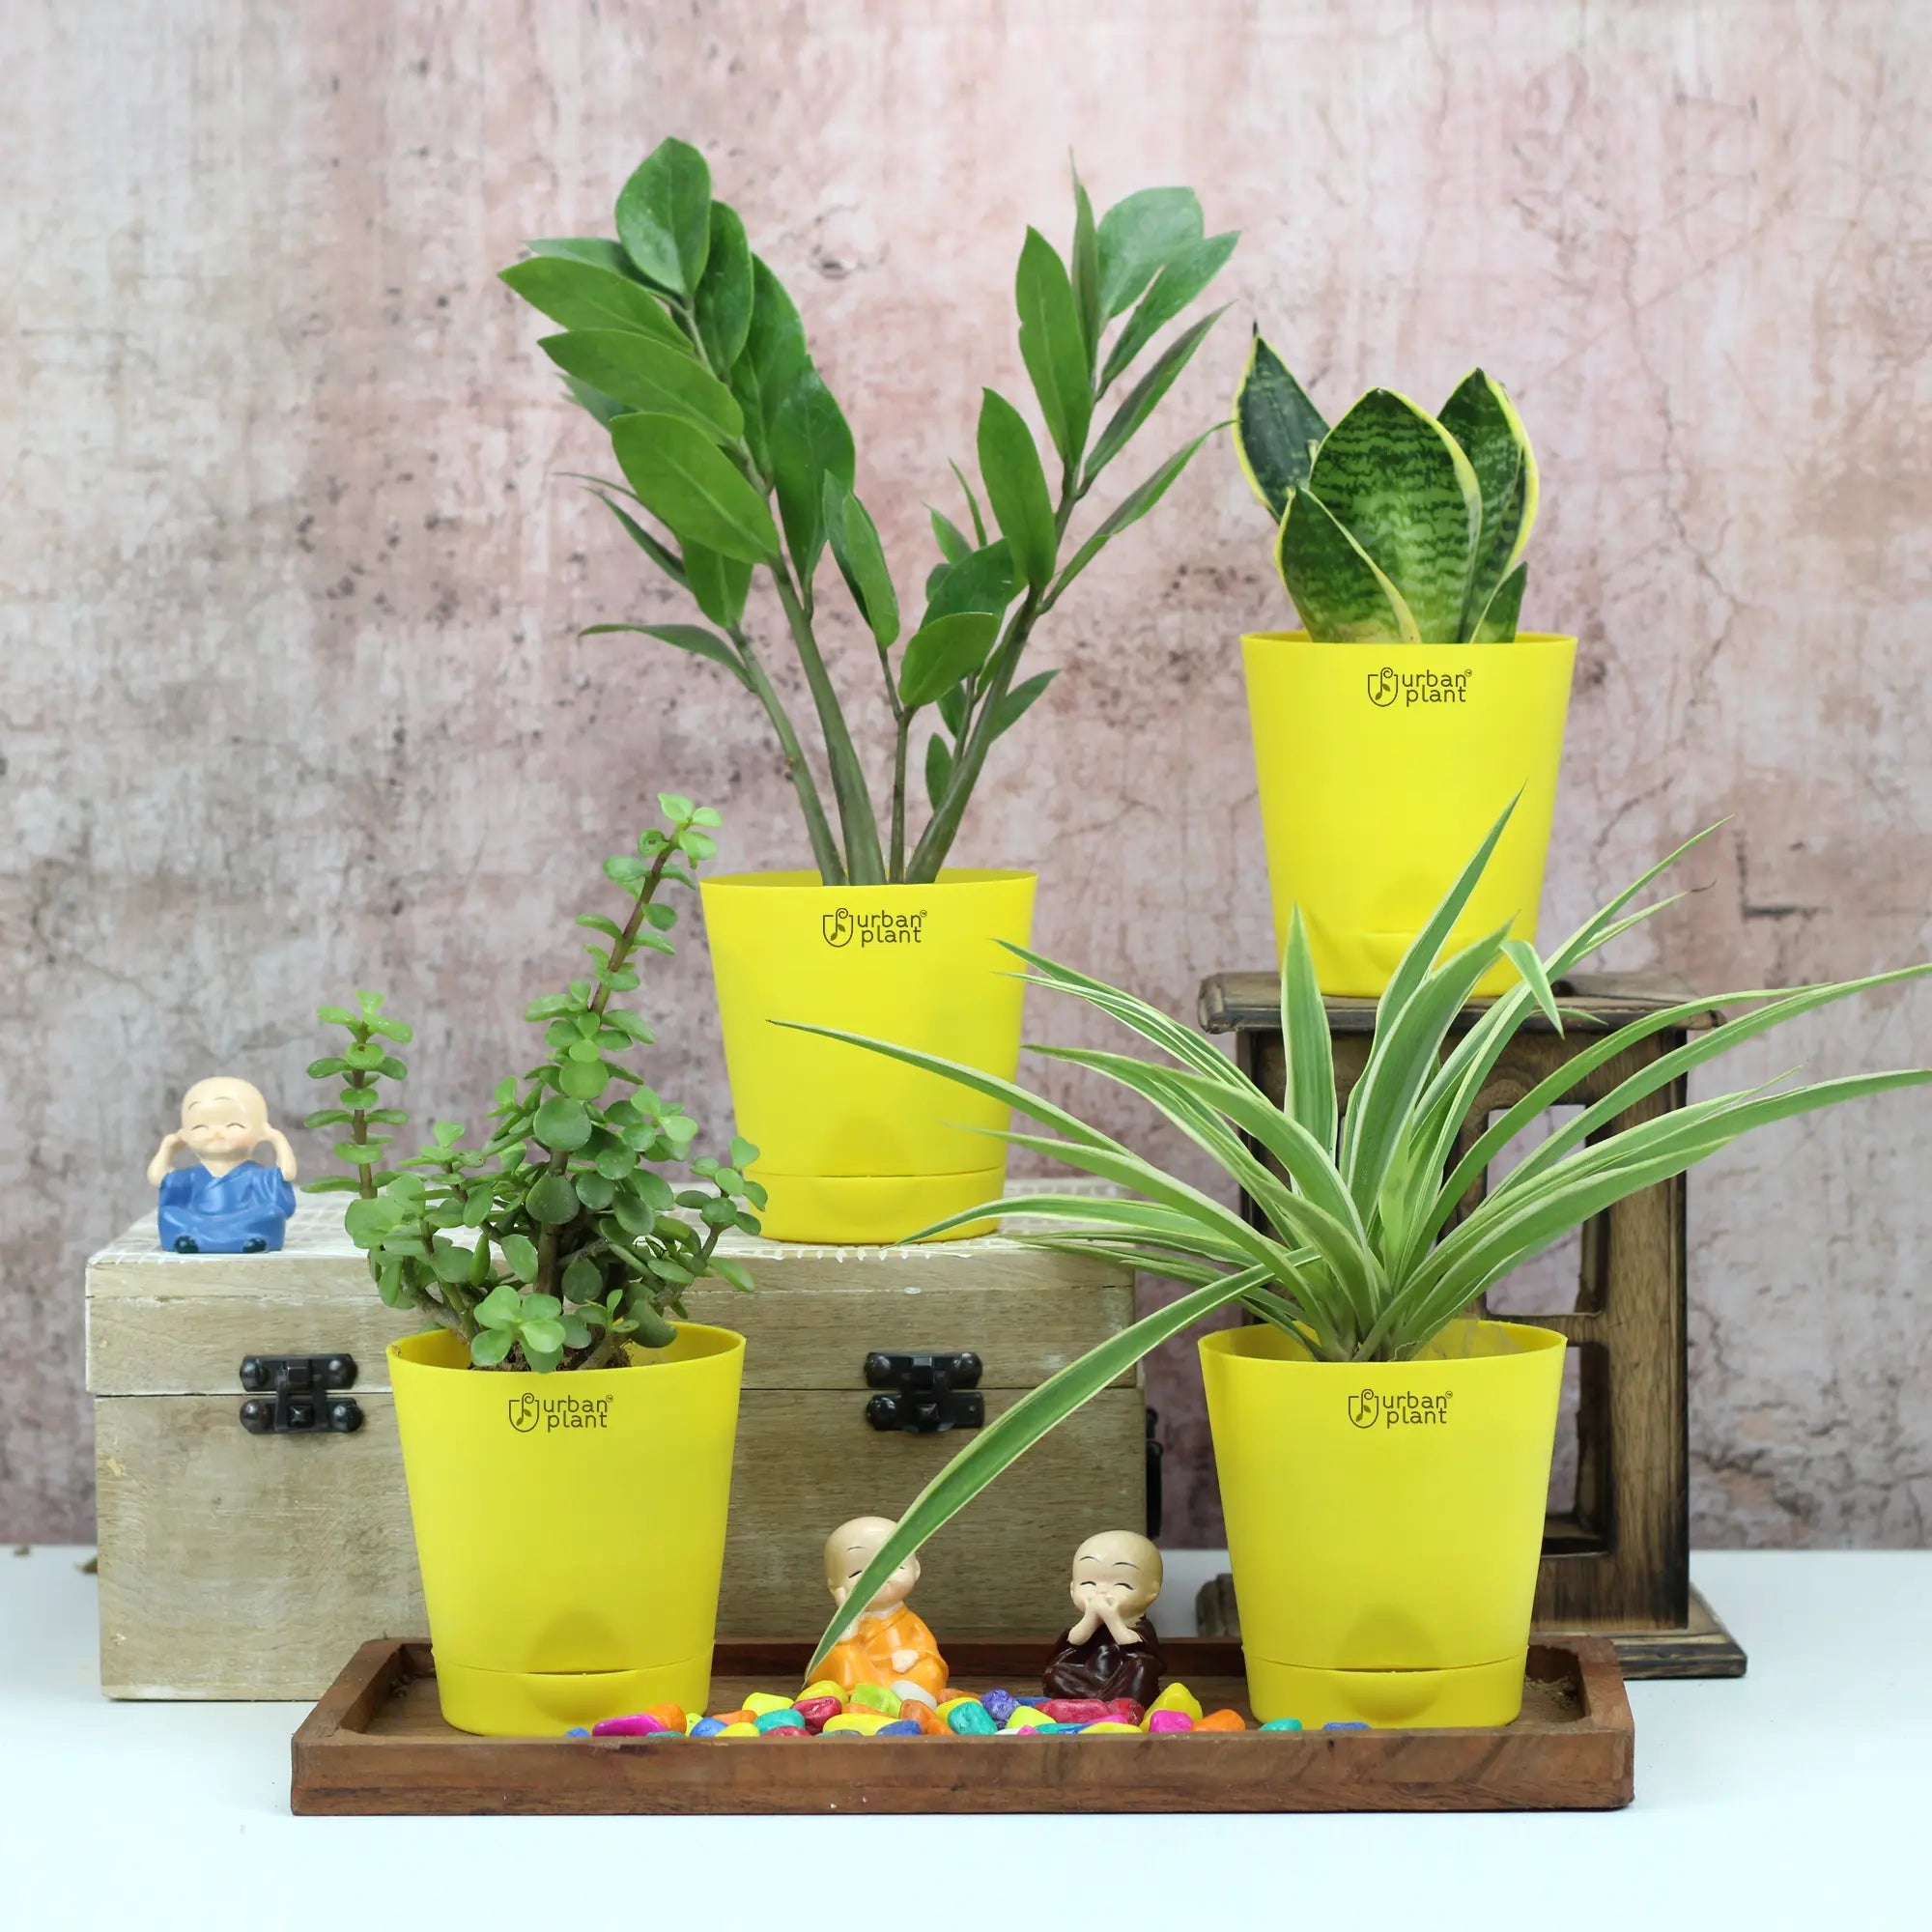 Vivid Self-Watering 4" Pot for Tabletop (Set Of 4) Urban Plant Yellow Set of 4 